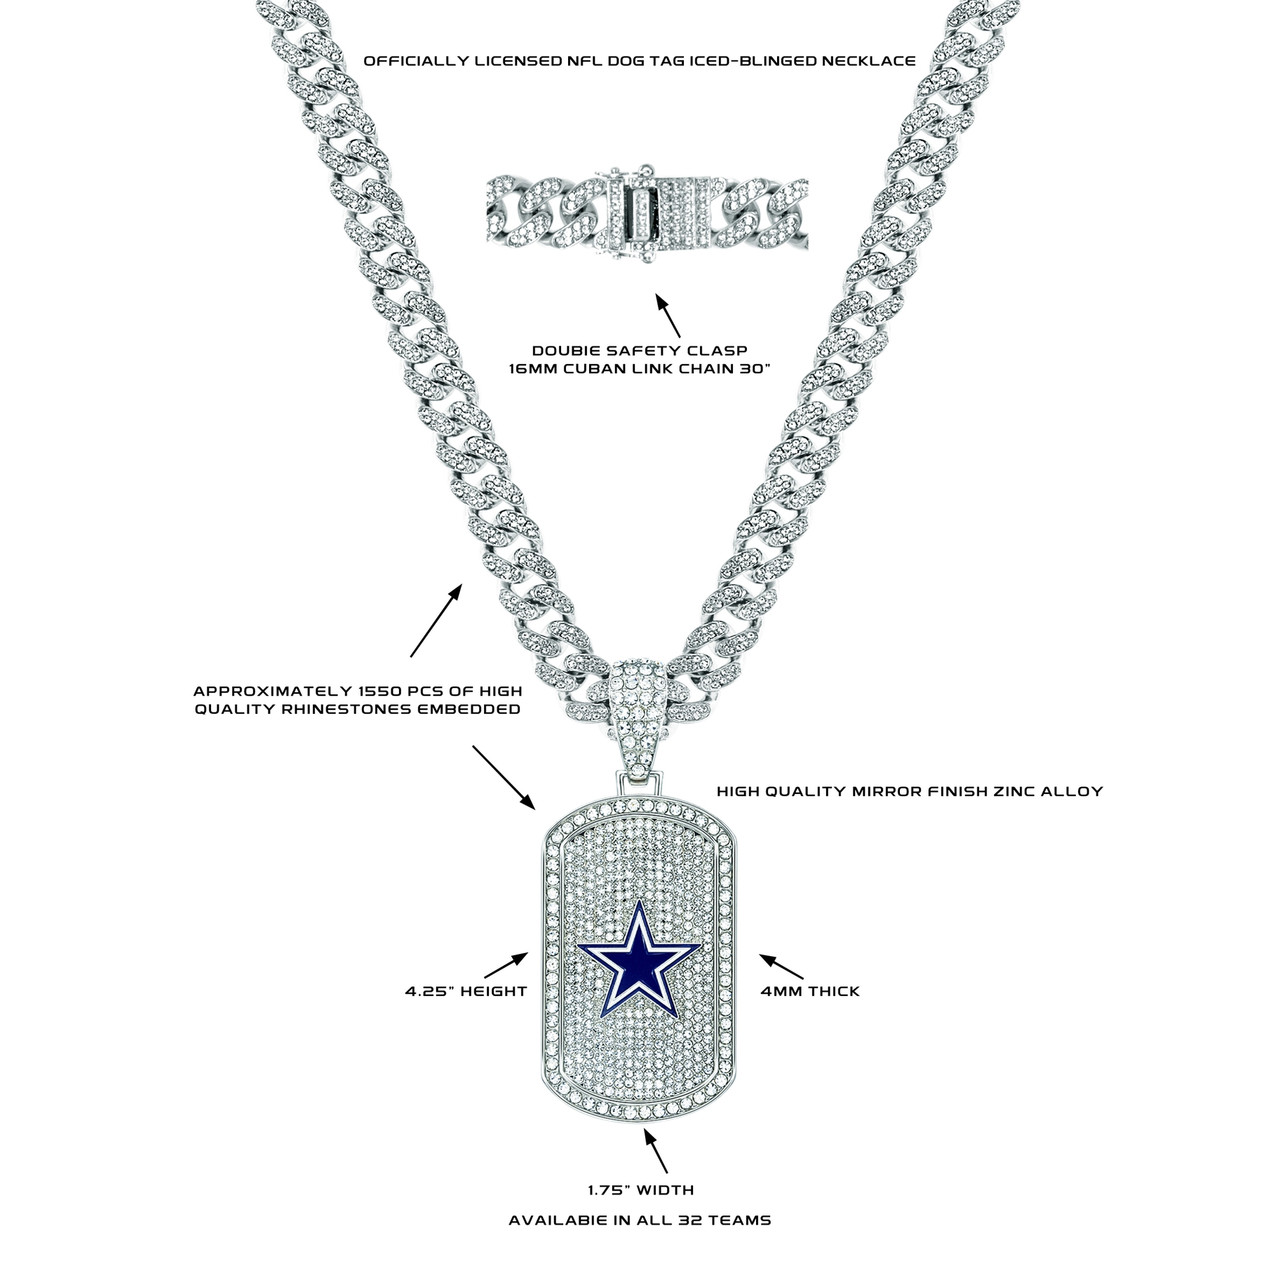 NFL Dallas Cowboys Bling Dog Tag Necklace